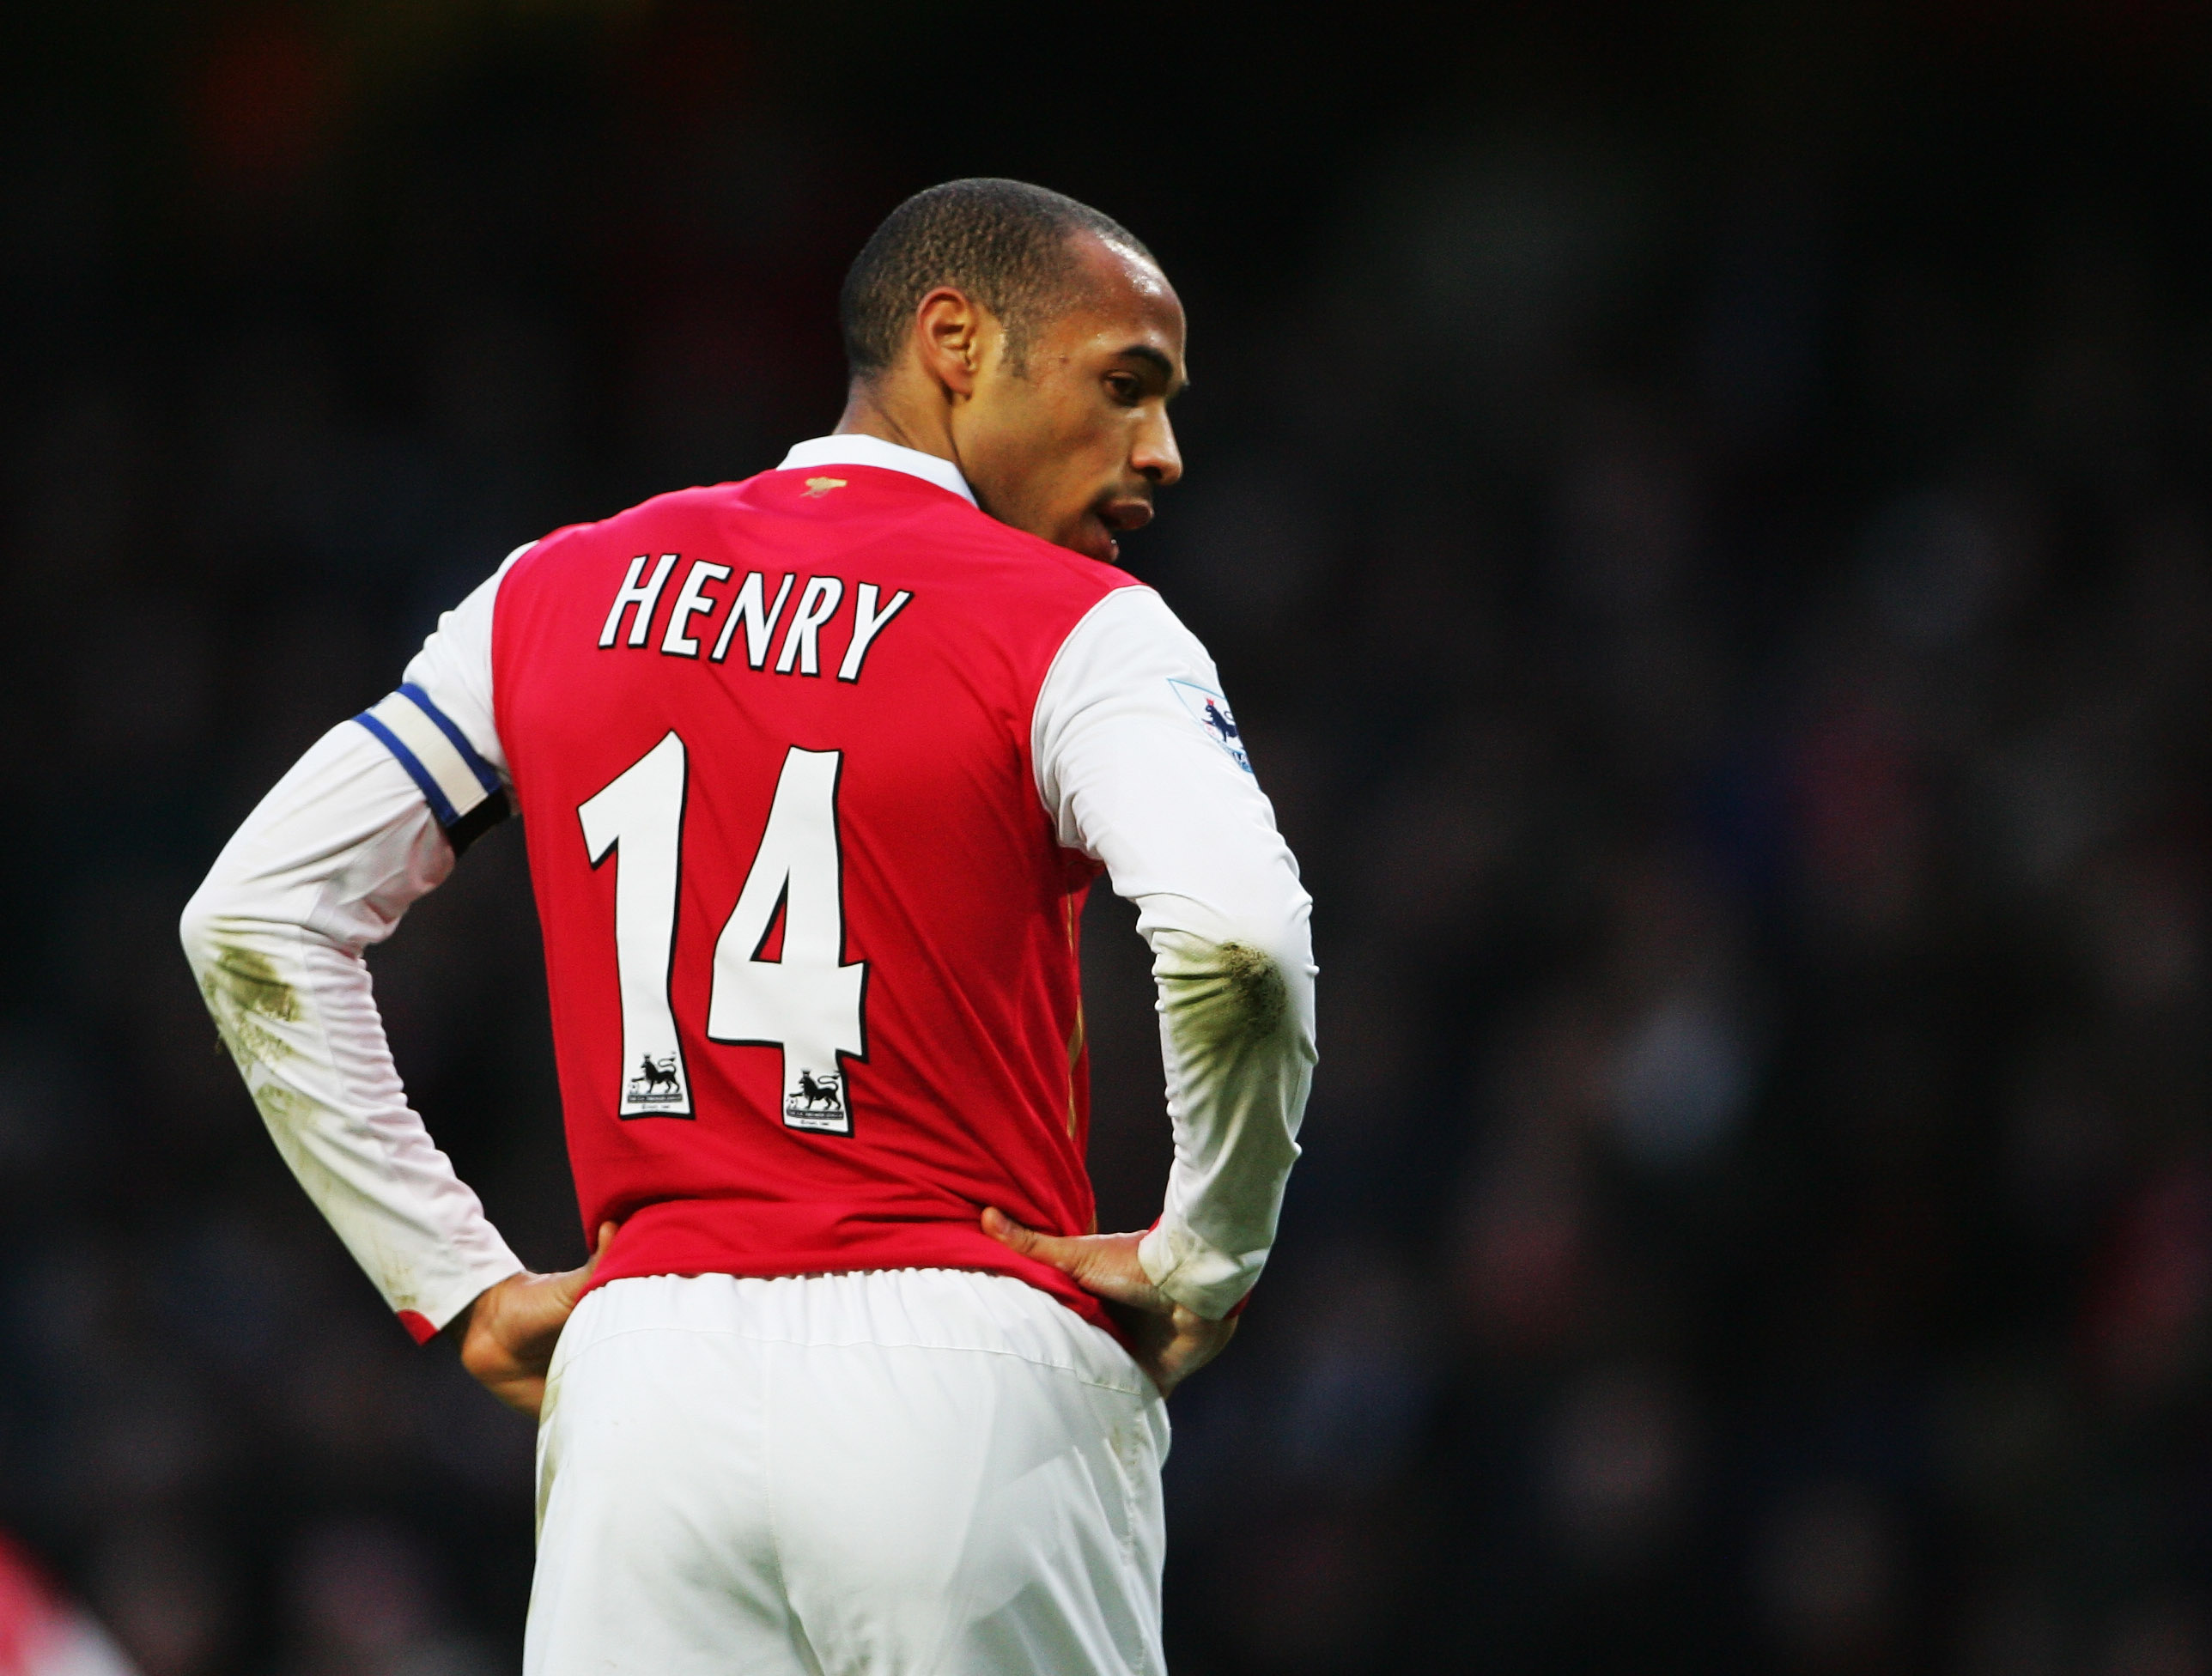 Thierry Henry Jersey 